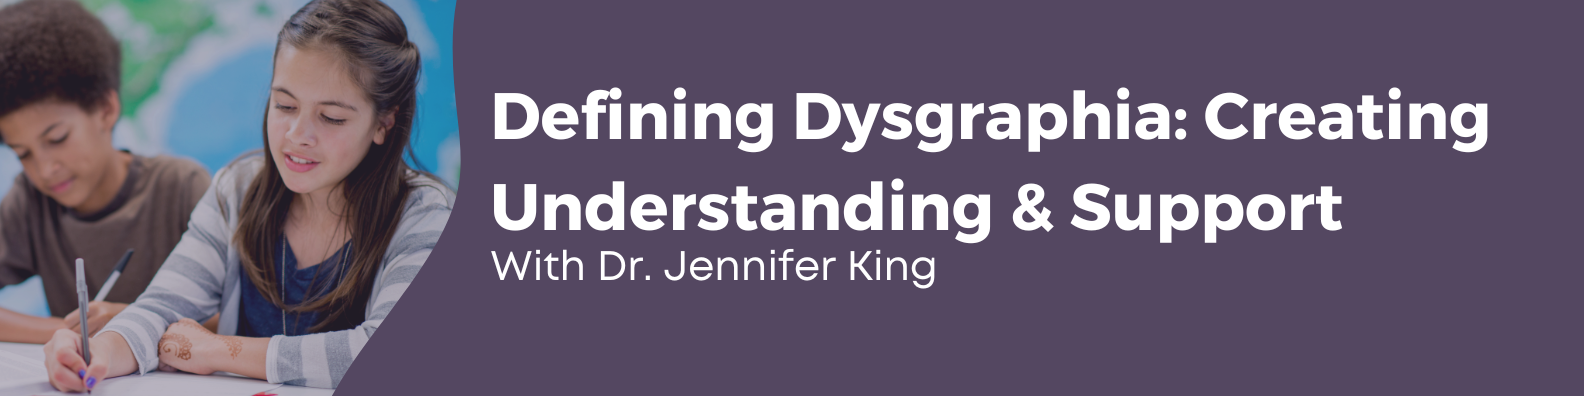 Defining Dysgraphia: Creating Understanding & Support with Dr. Jennifer King